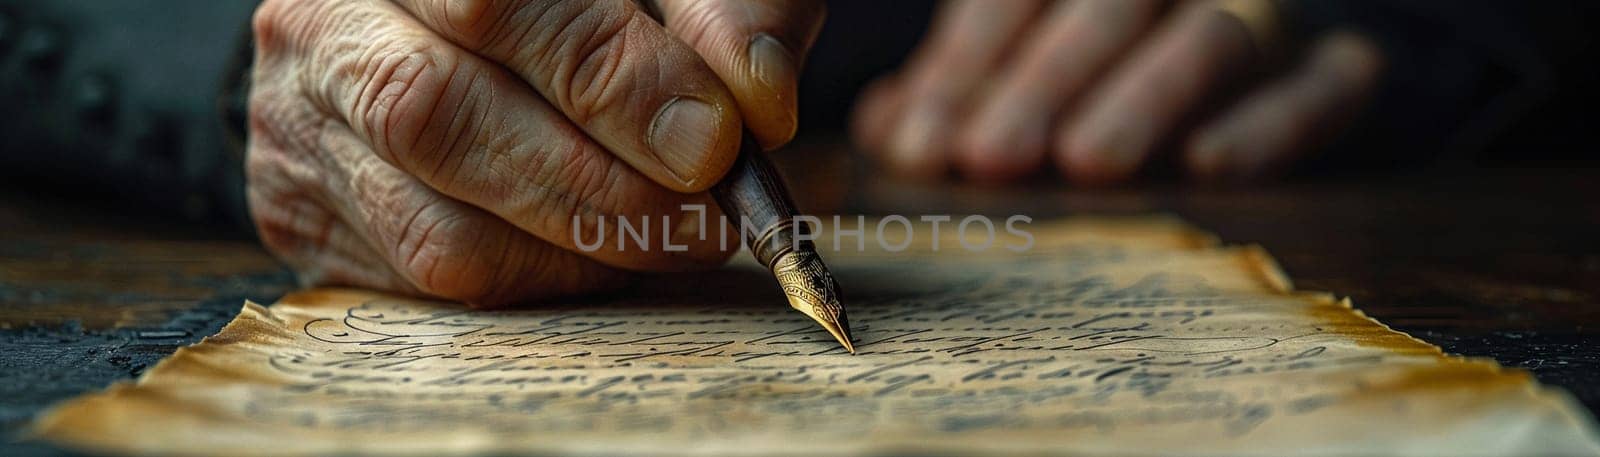 Calligrapher practicing elegant lettering, symbolizing the beauty and art of handwriting